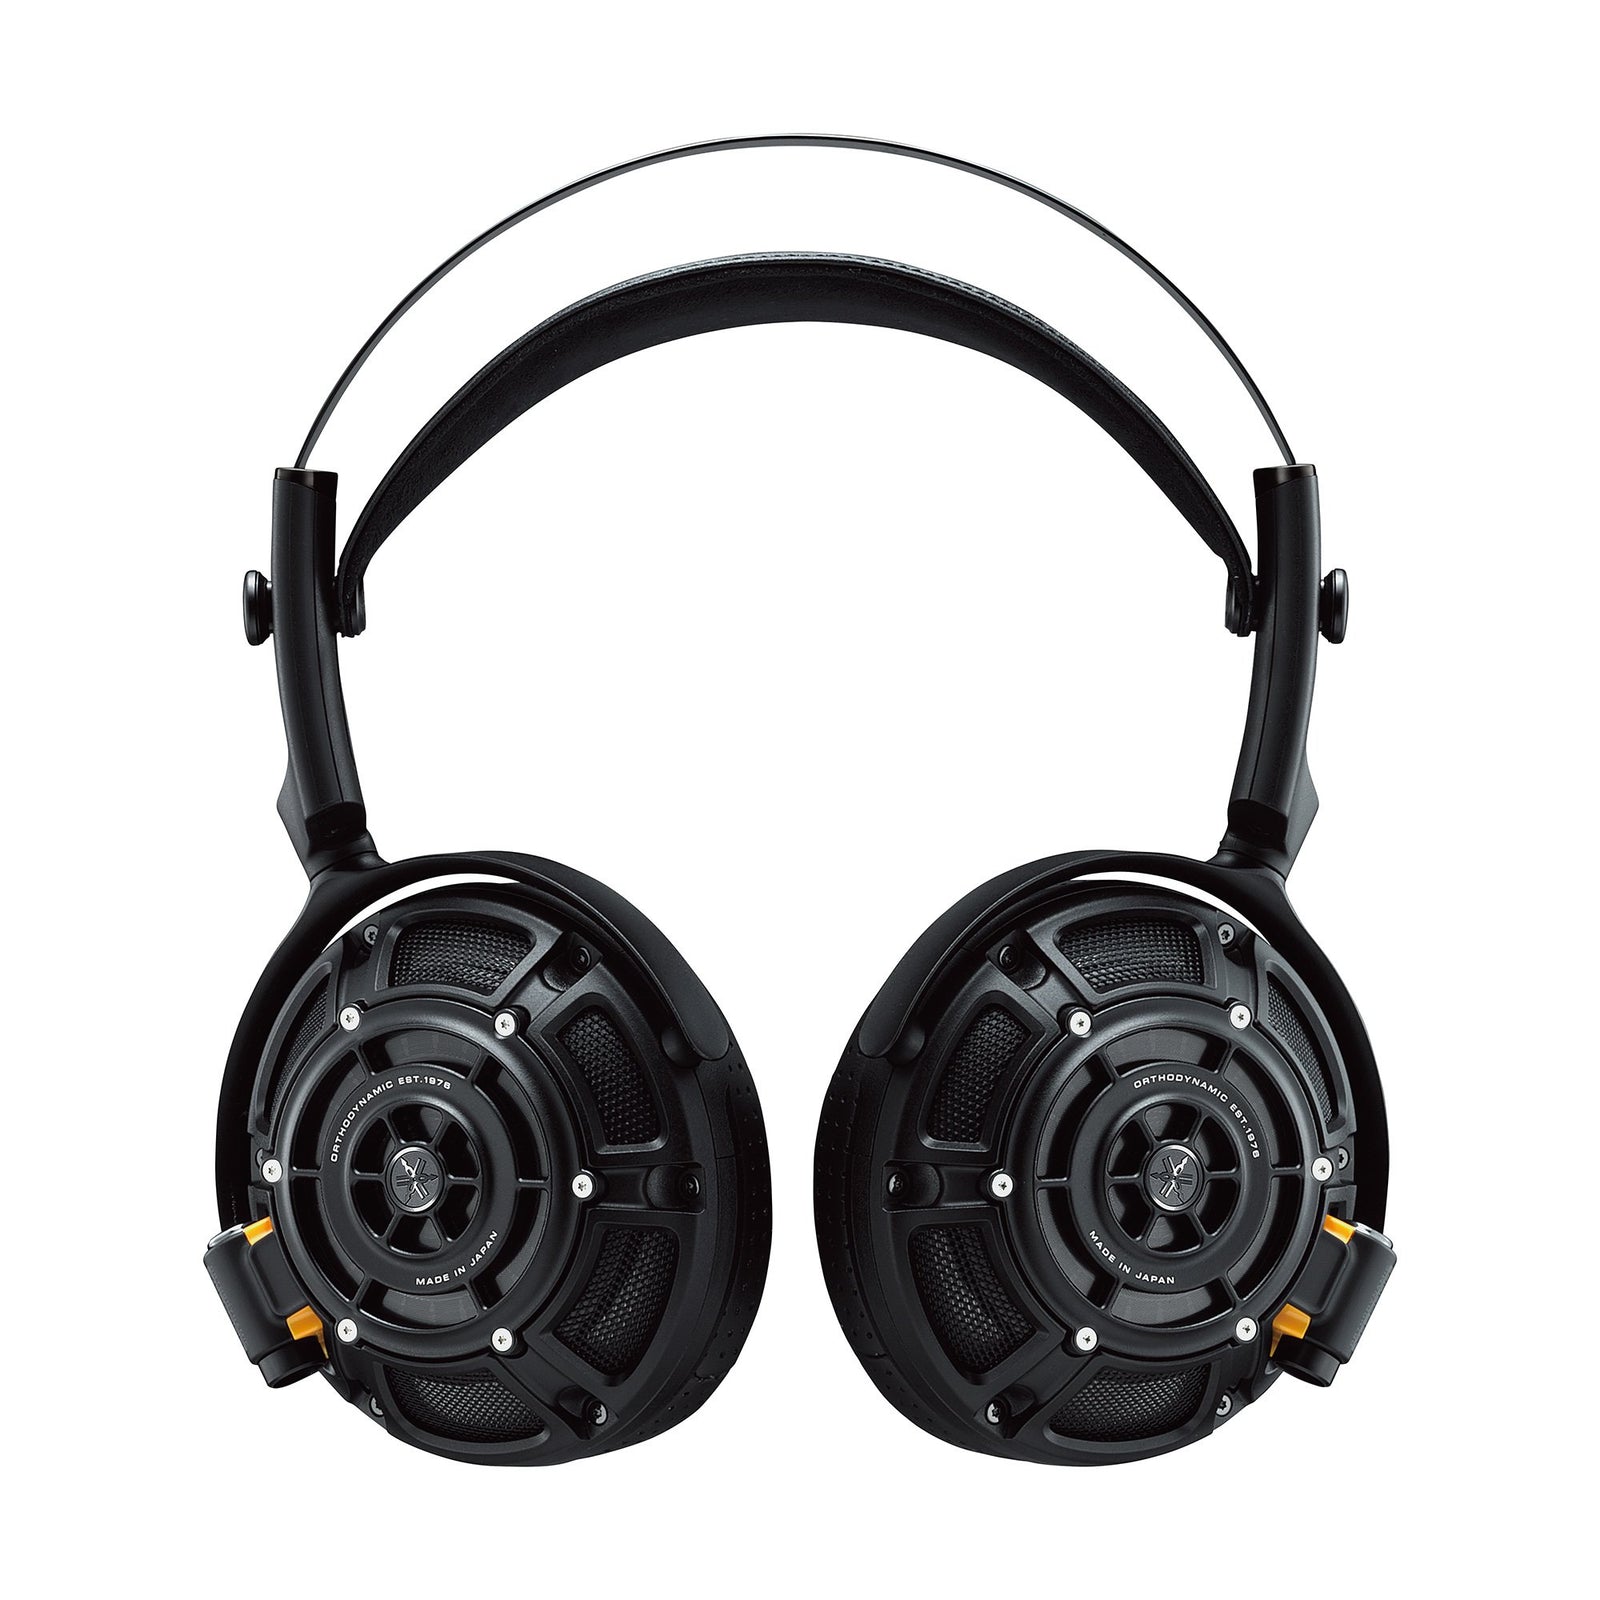 YAMAHA YH5000SE - HEADPHONES | VINYL SOUND Flagship Headphone that offers ultimate True Sound using an ORTHODYNAMIC™ driver. Yamaha True Sound allows you to immerse yourself in a world of sound and music Yamaha ORTHODYNAMIC™ driver provides sonic accuracy and enables ultra-responsive performance Ultra-lightweight